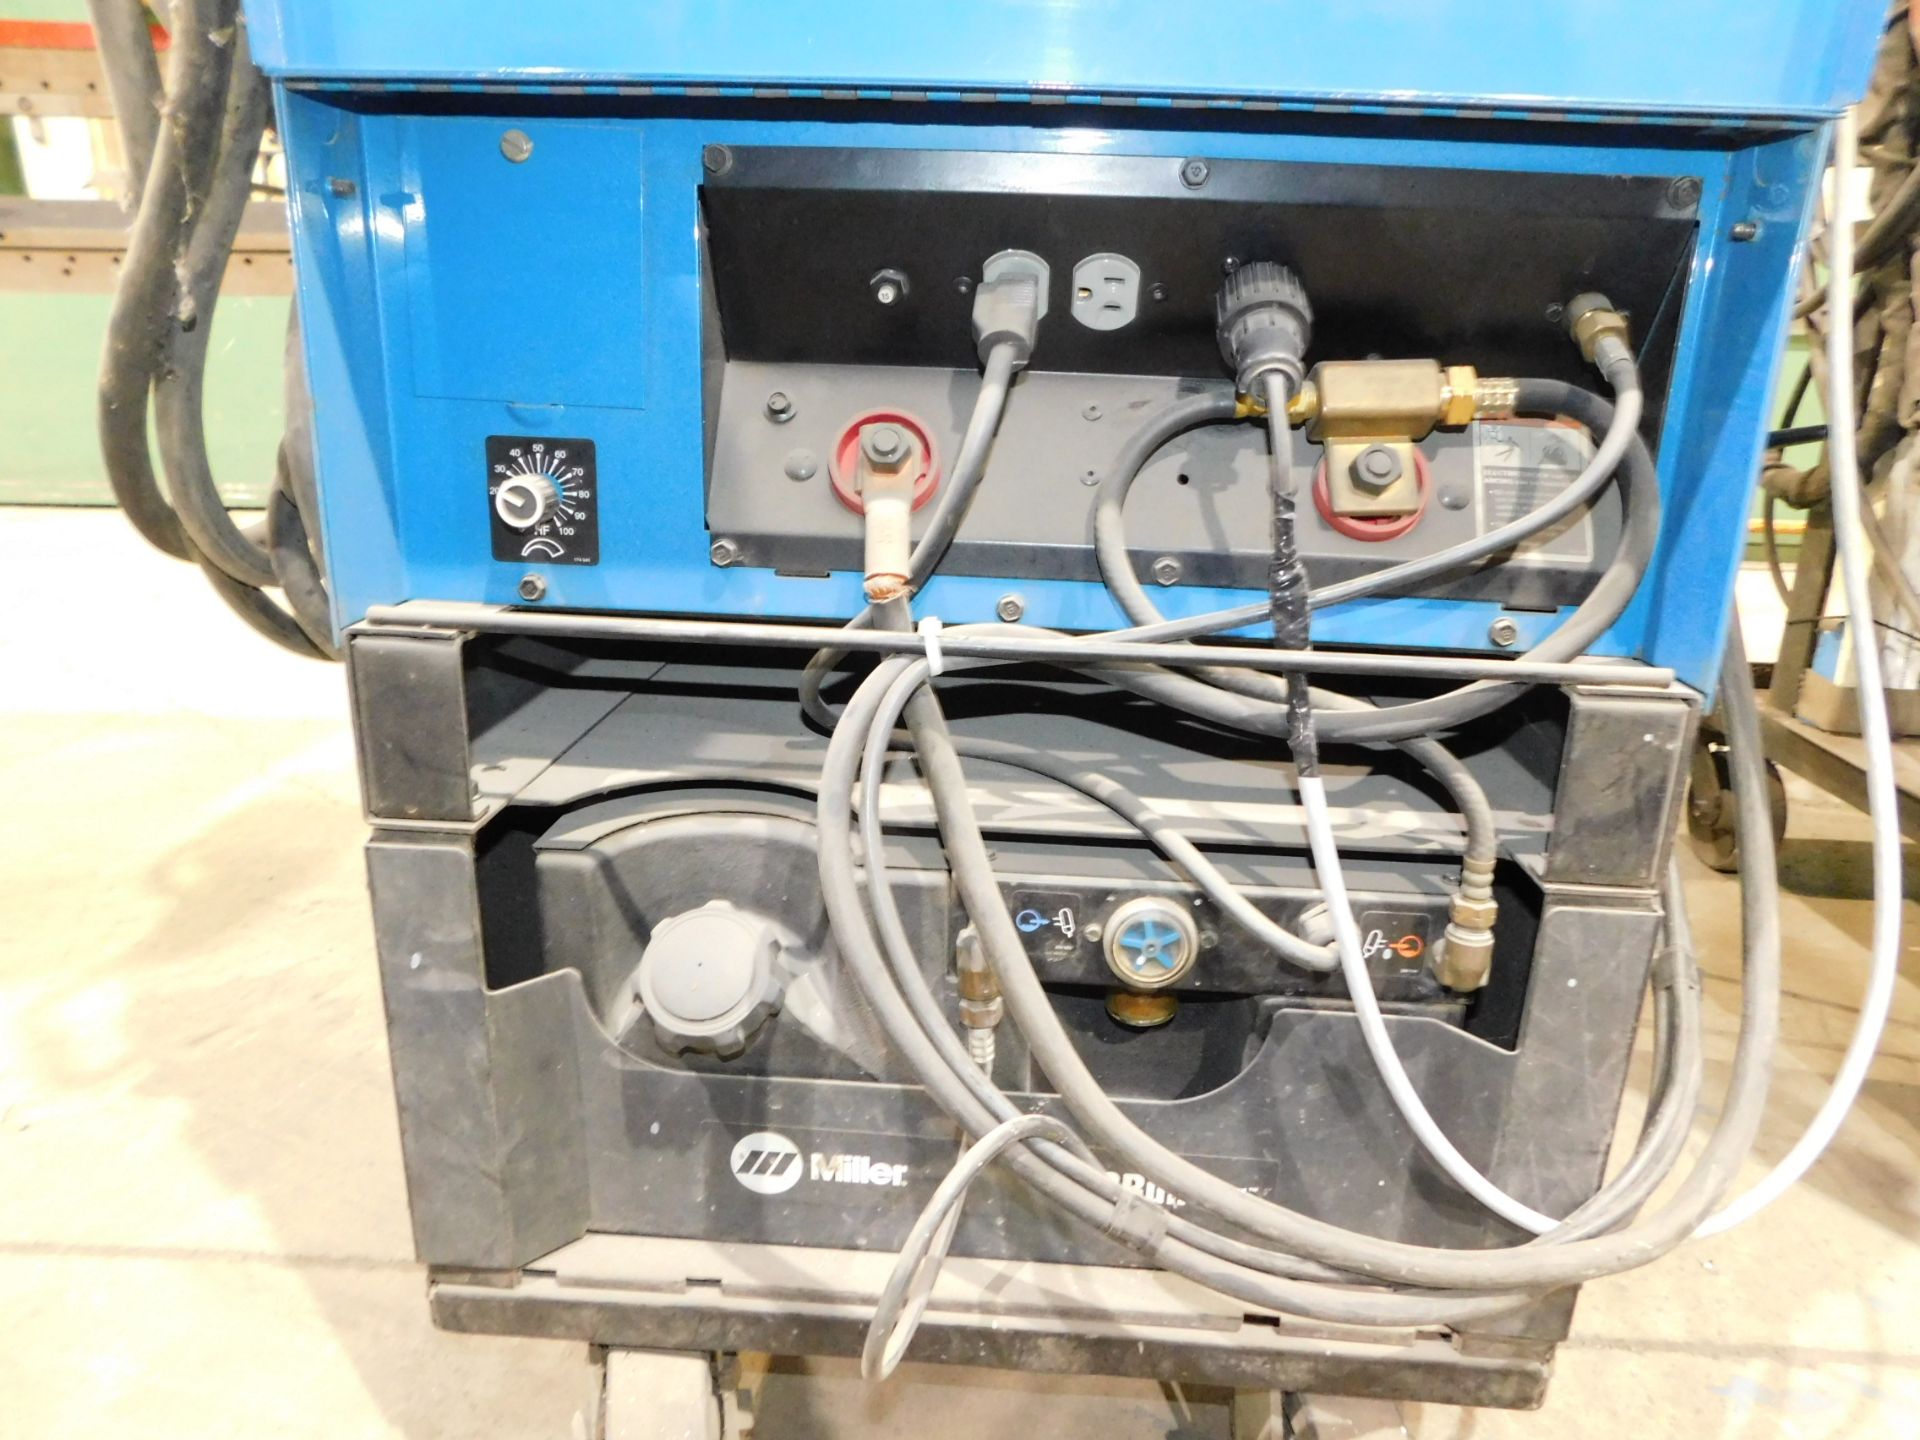 Miller Synchrowave 350LX Tig Welder, s/n LB294456, with Built in Chiller, Torch Ground Cable, - Image 6 of 7